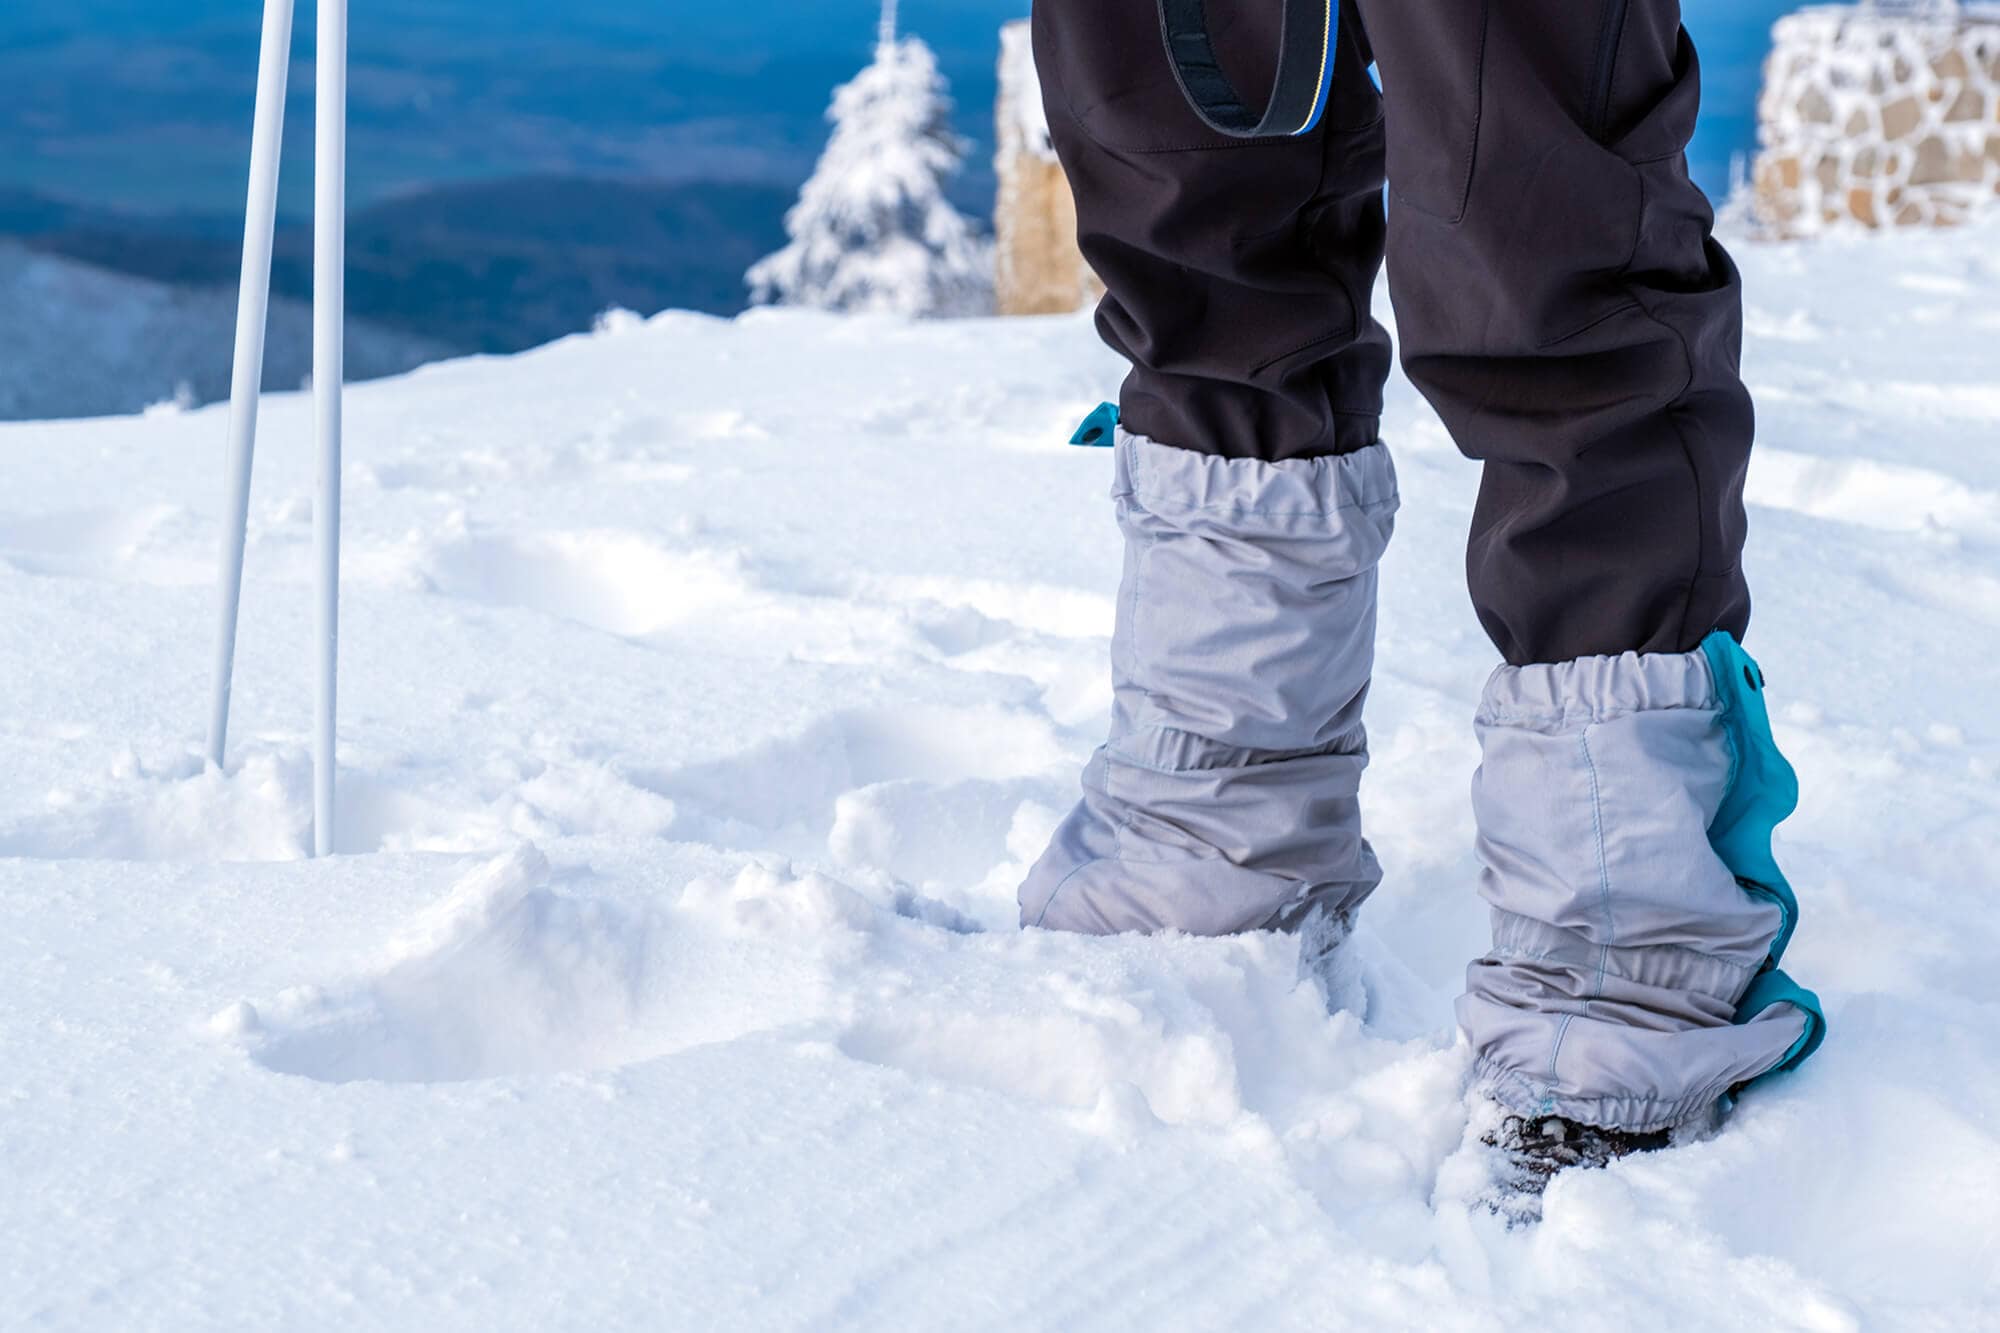 How To Overcome Camping Cold Feet. Our Guide To Warm Feet.9 min read